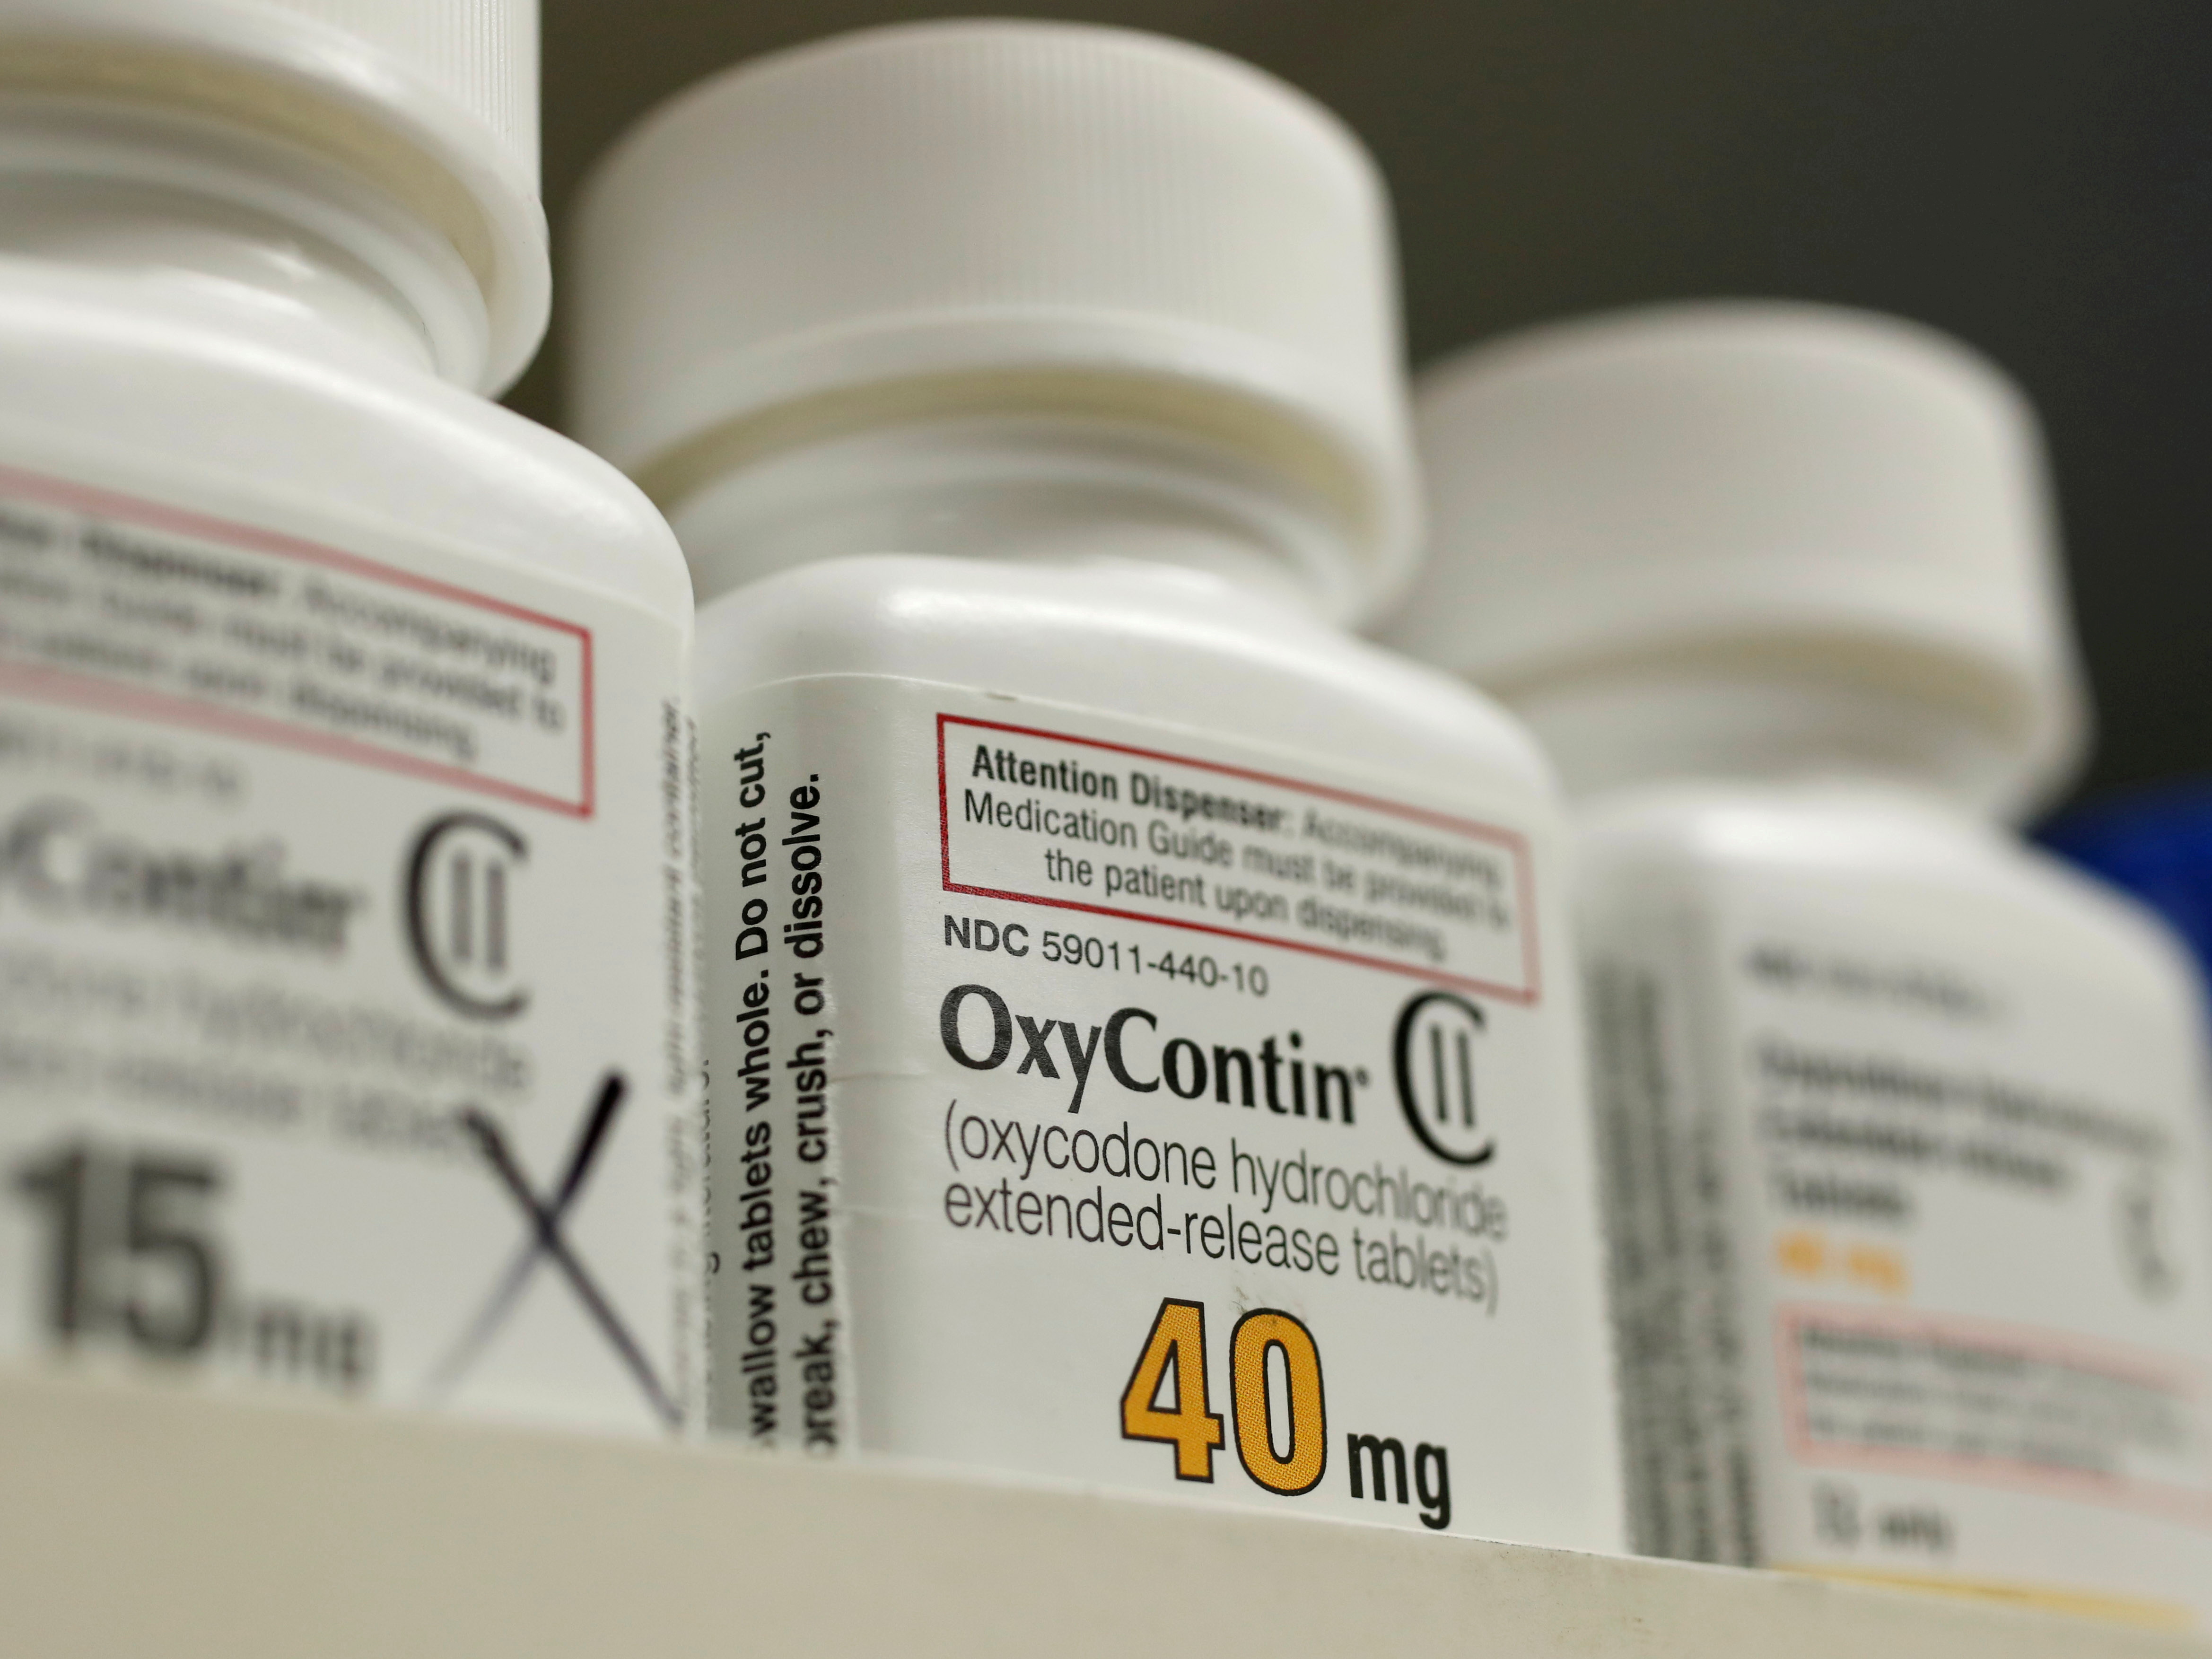 Bottles of prescription painkiller OxyContin made by Purdue Pharma LP sit on a shelf at a local pharmacy in Provo